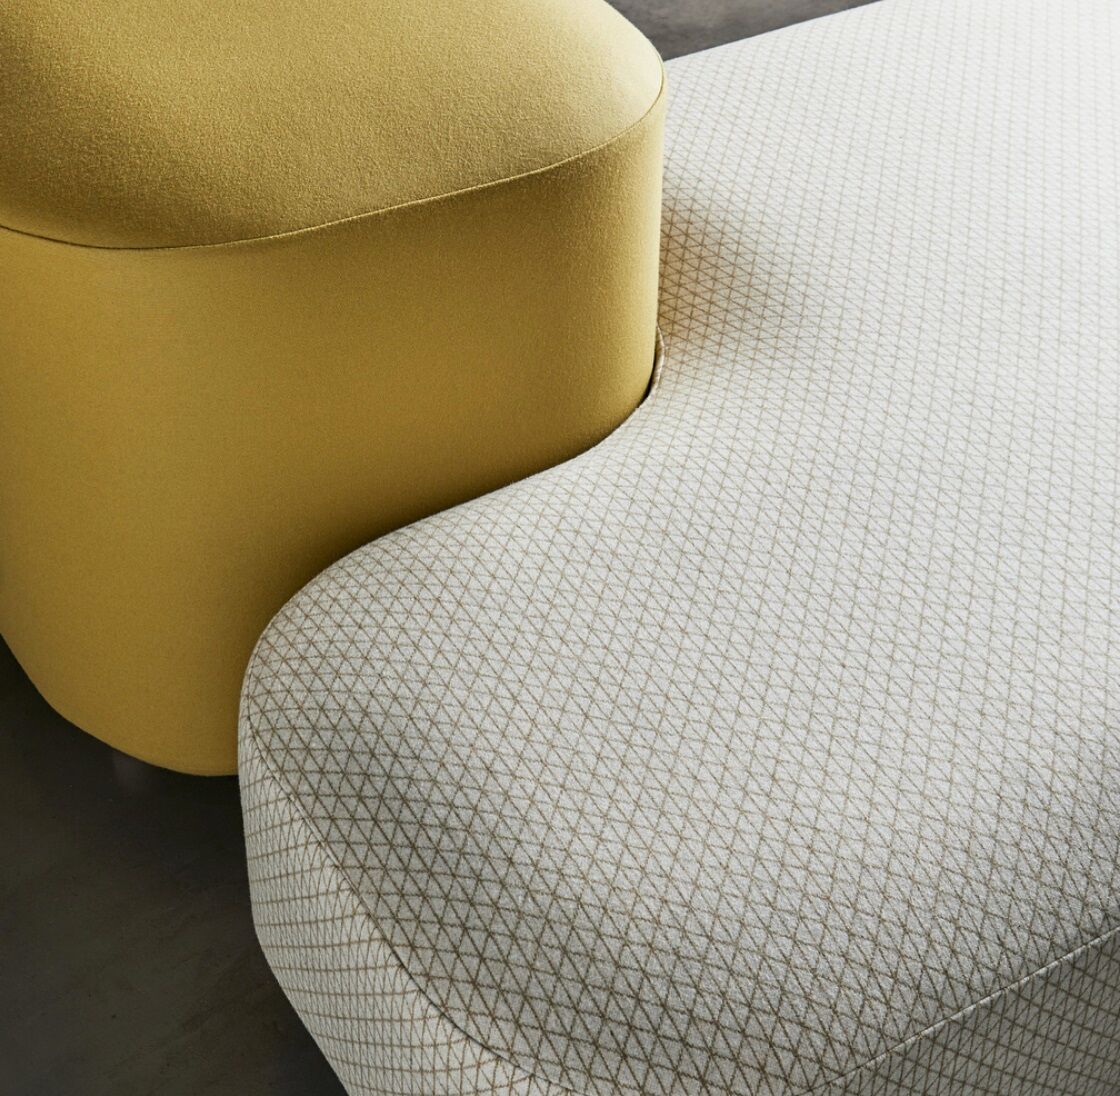 Designtex and Coalesse new textile collection Bixby pattern on ottoman